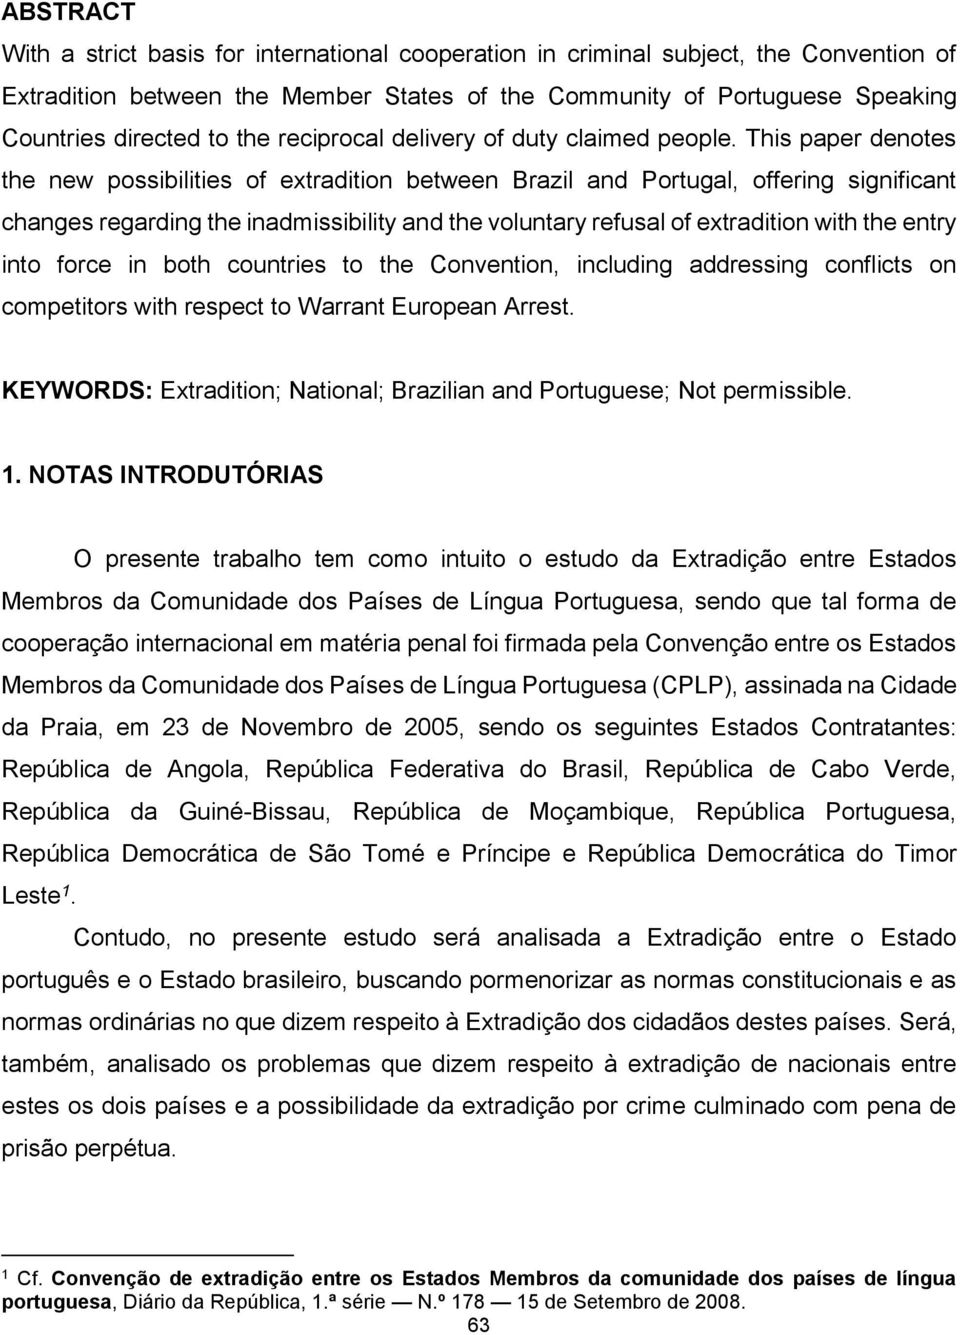 This paper denotes the new possibilities of extradition between Brazil and Portugal, offering significant changes regarding the inadmissibility and the voluntary refusal of extradition with the entry